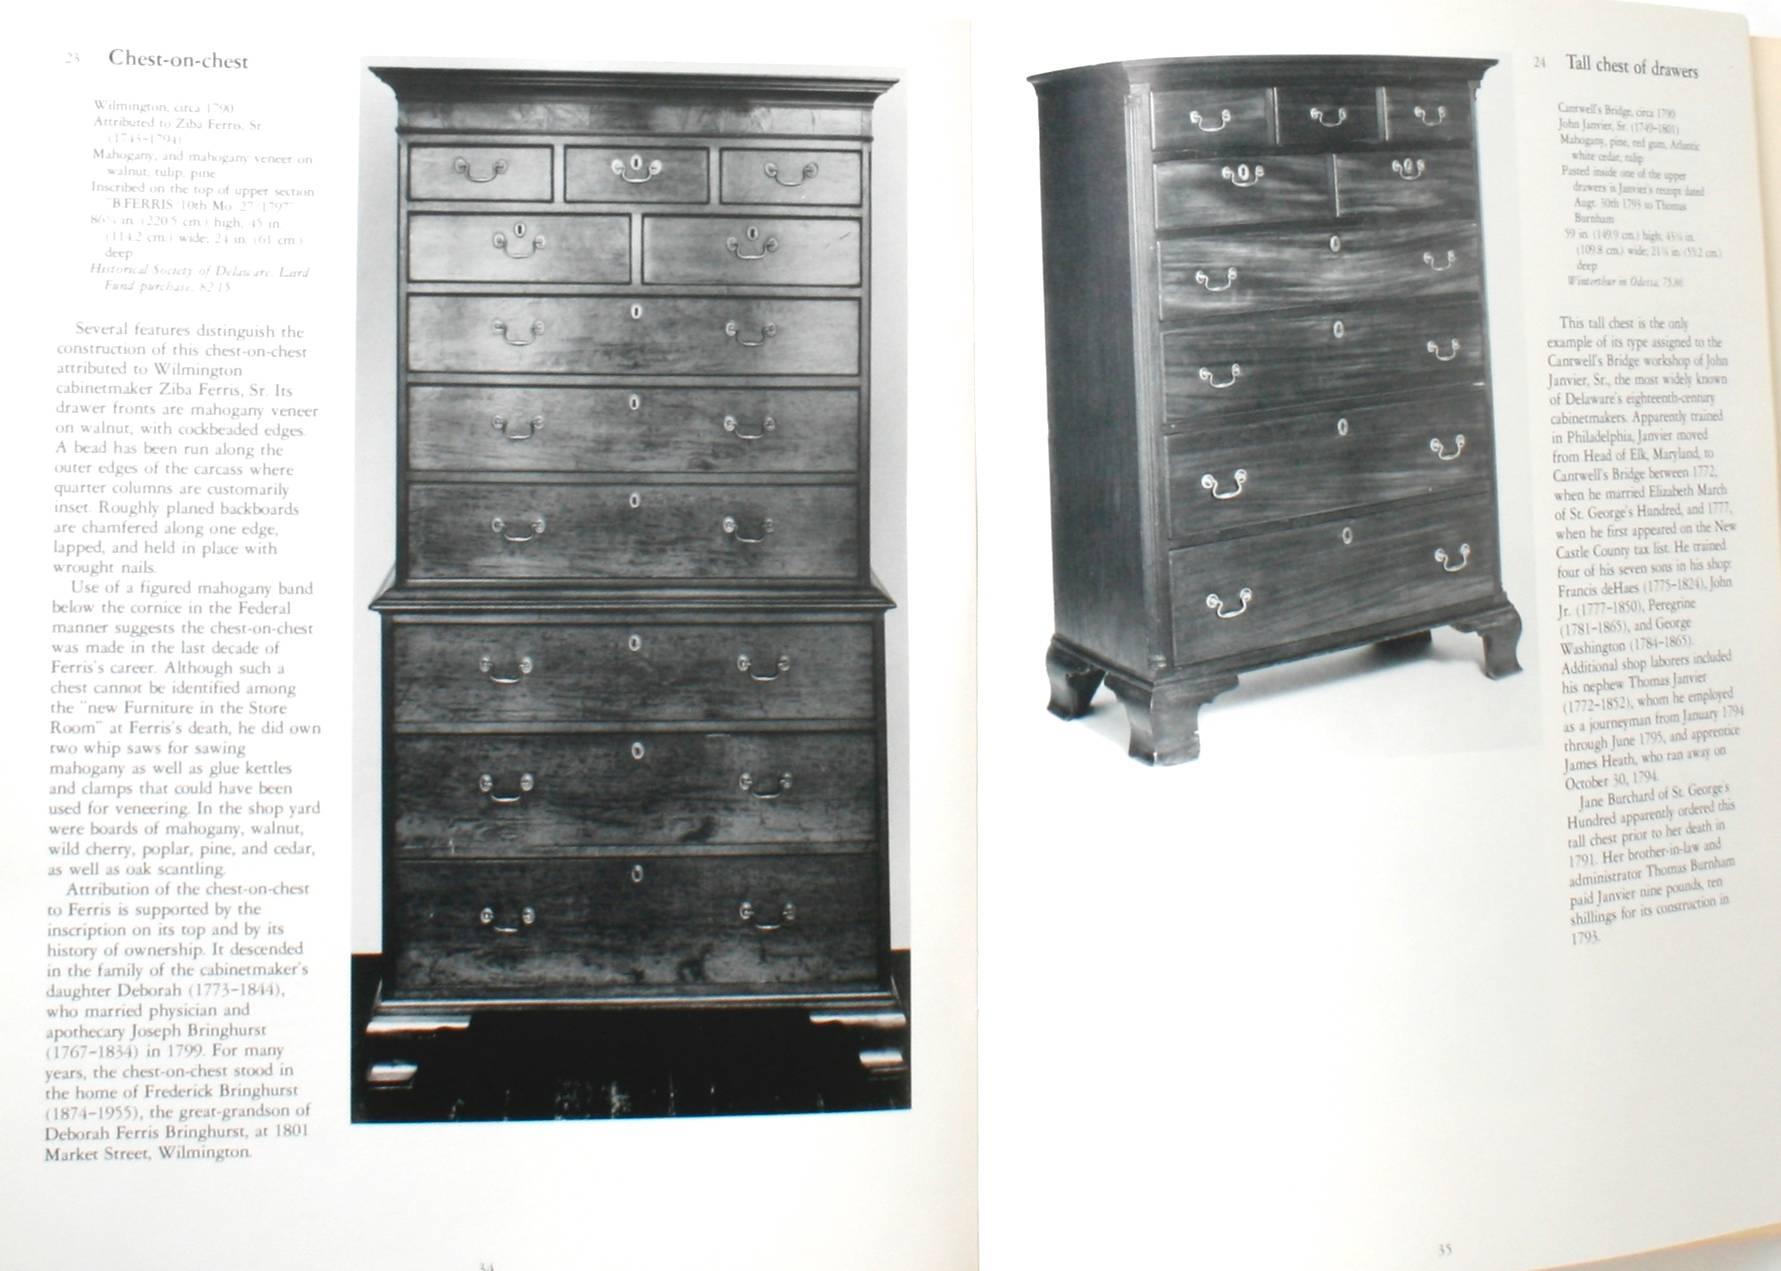 American Plain and Ornamental, Delaware Furniture 1740-1890, First Edition For Sale